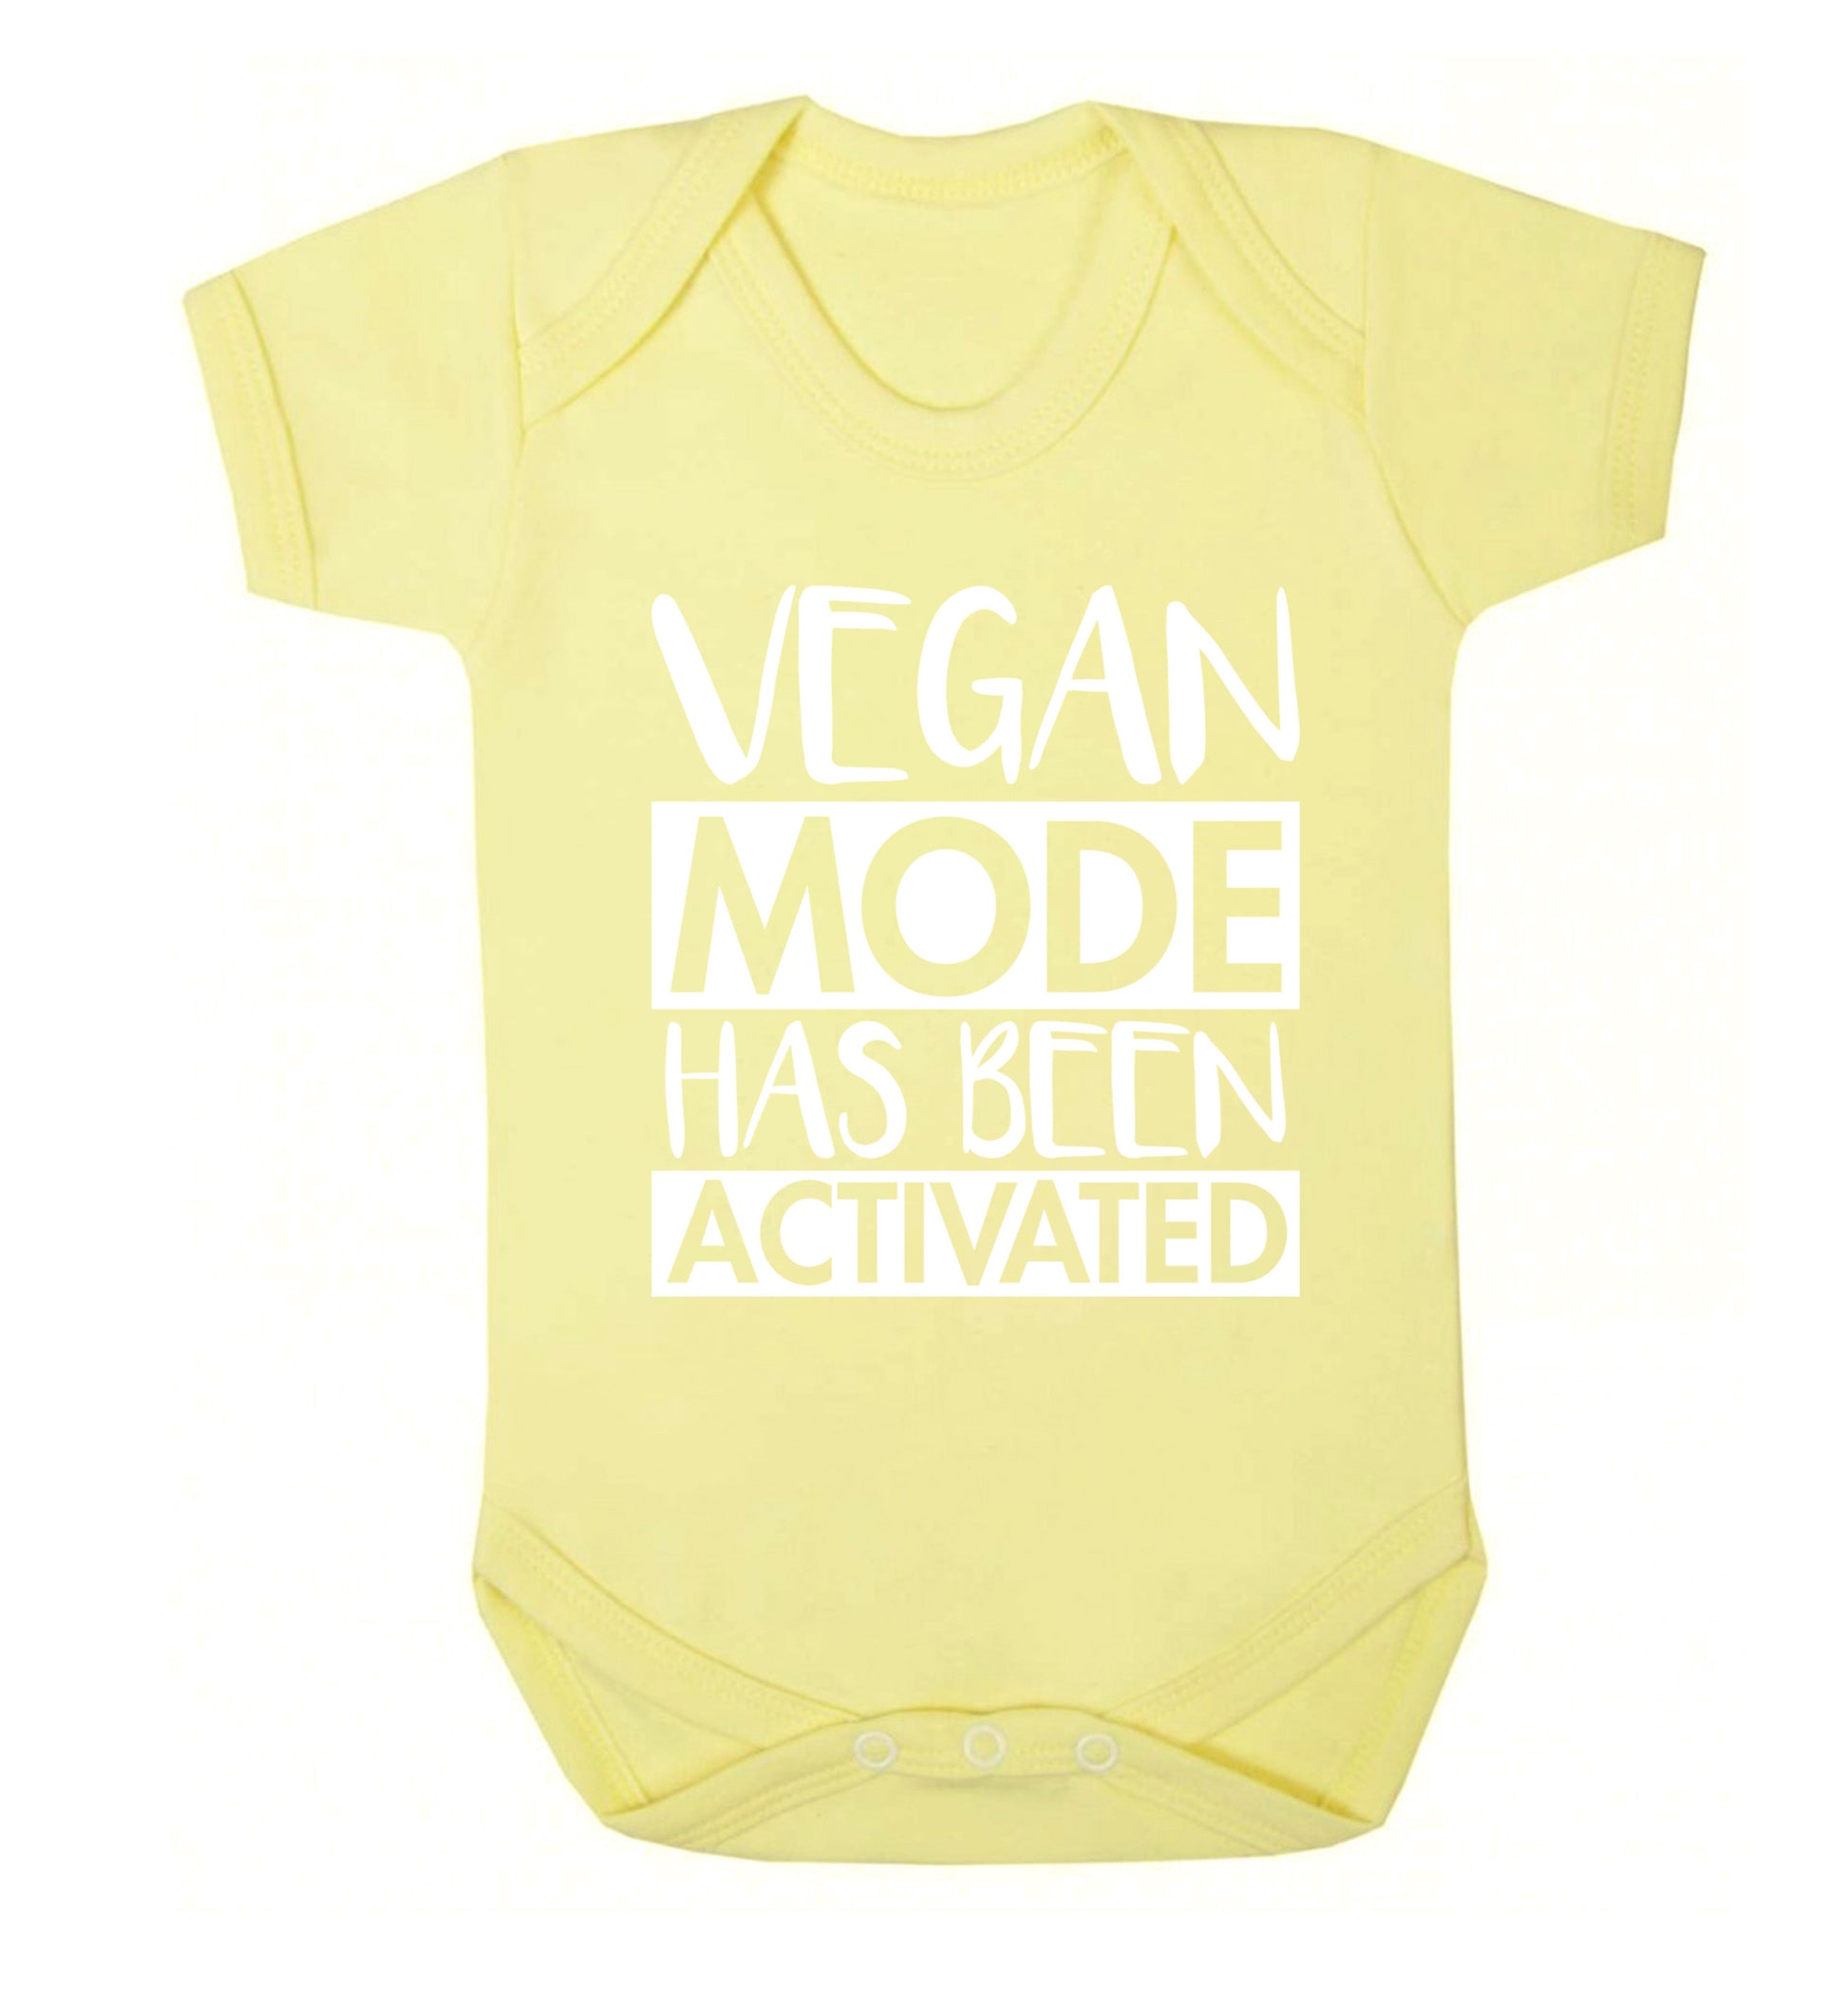 Vegan mode activated Baby Vest pale yellow 18-24 months